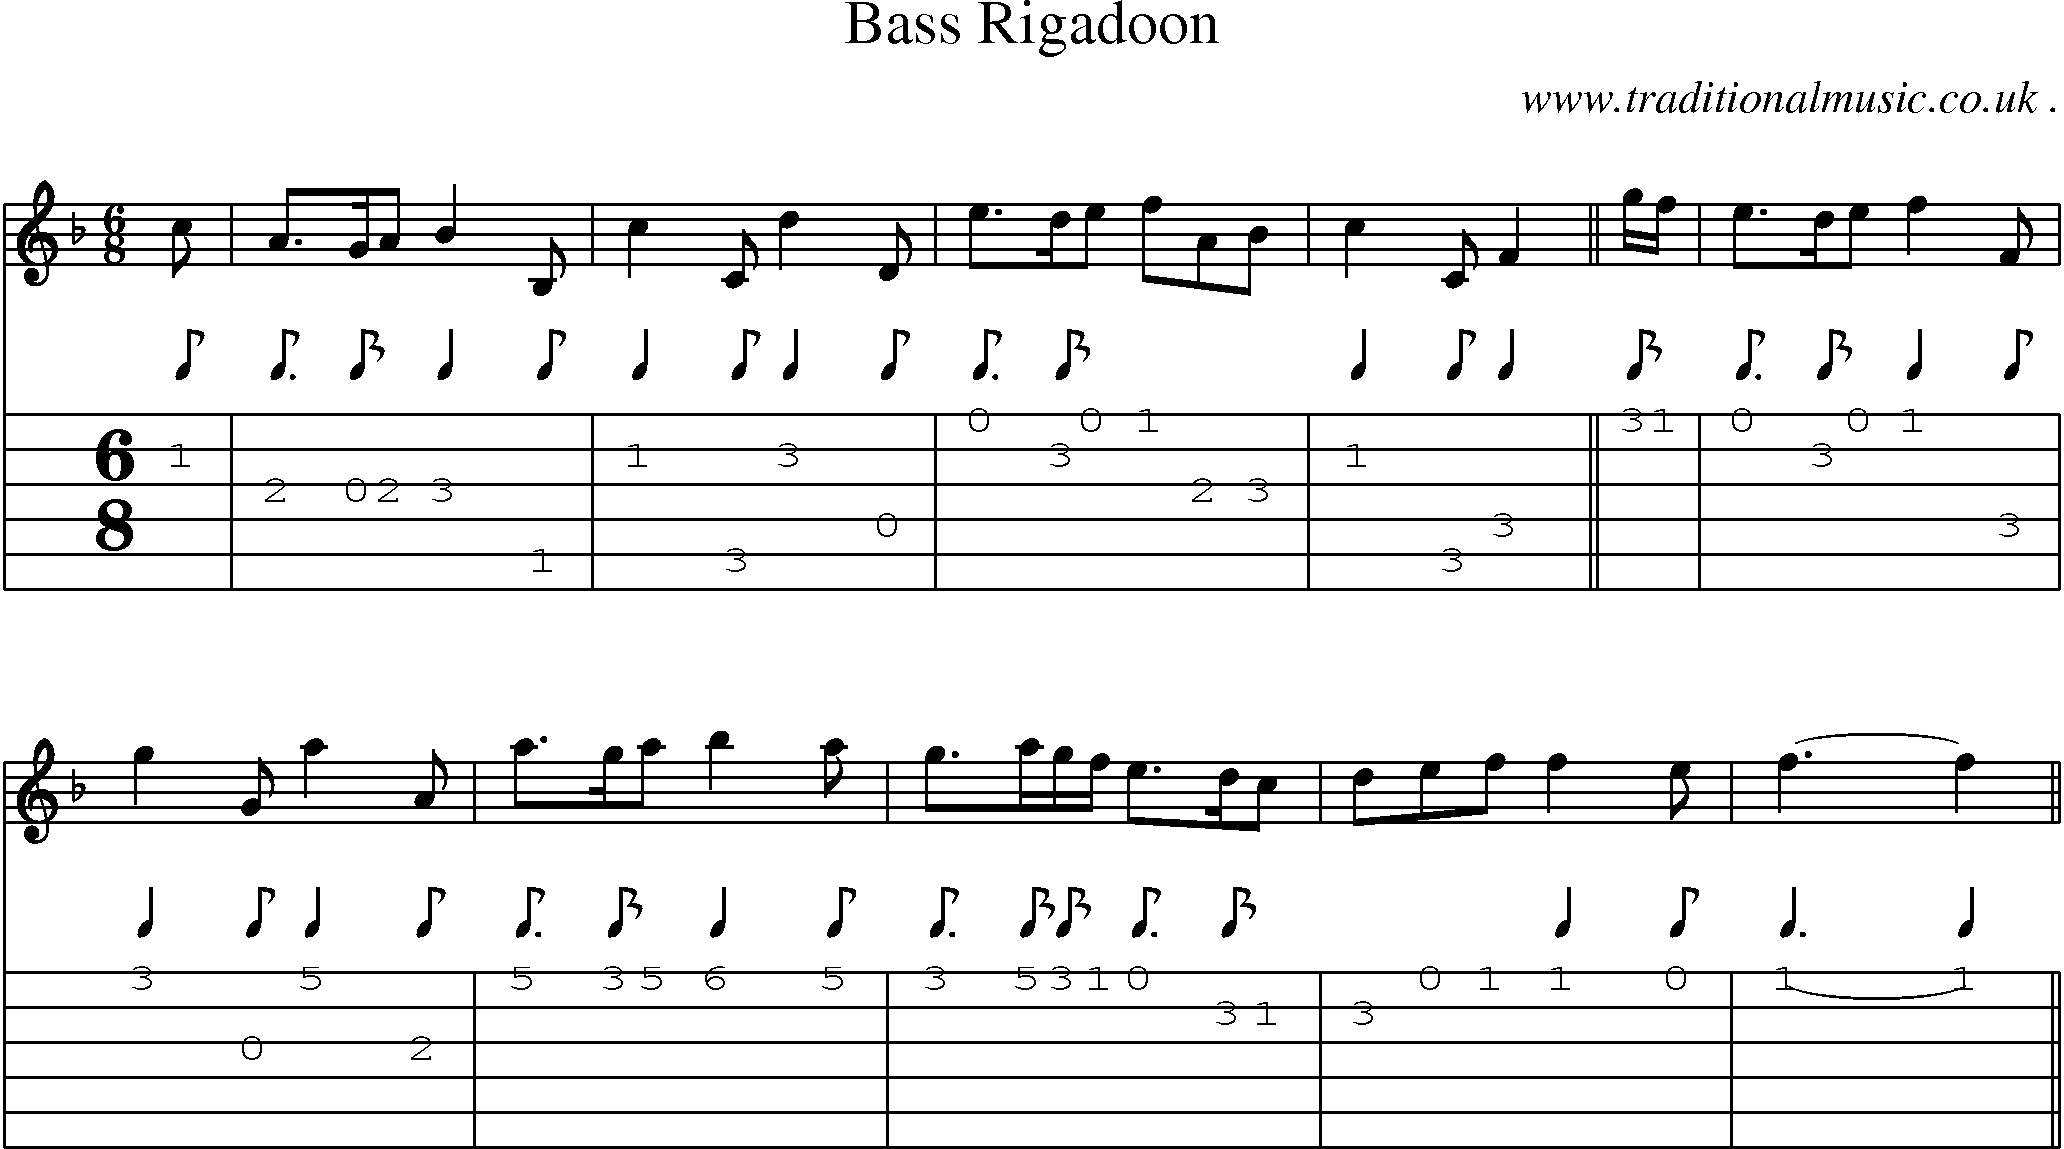 Sheet-Music and Guitar Tabs for Bass Rigadoon